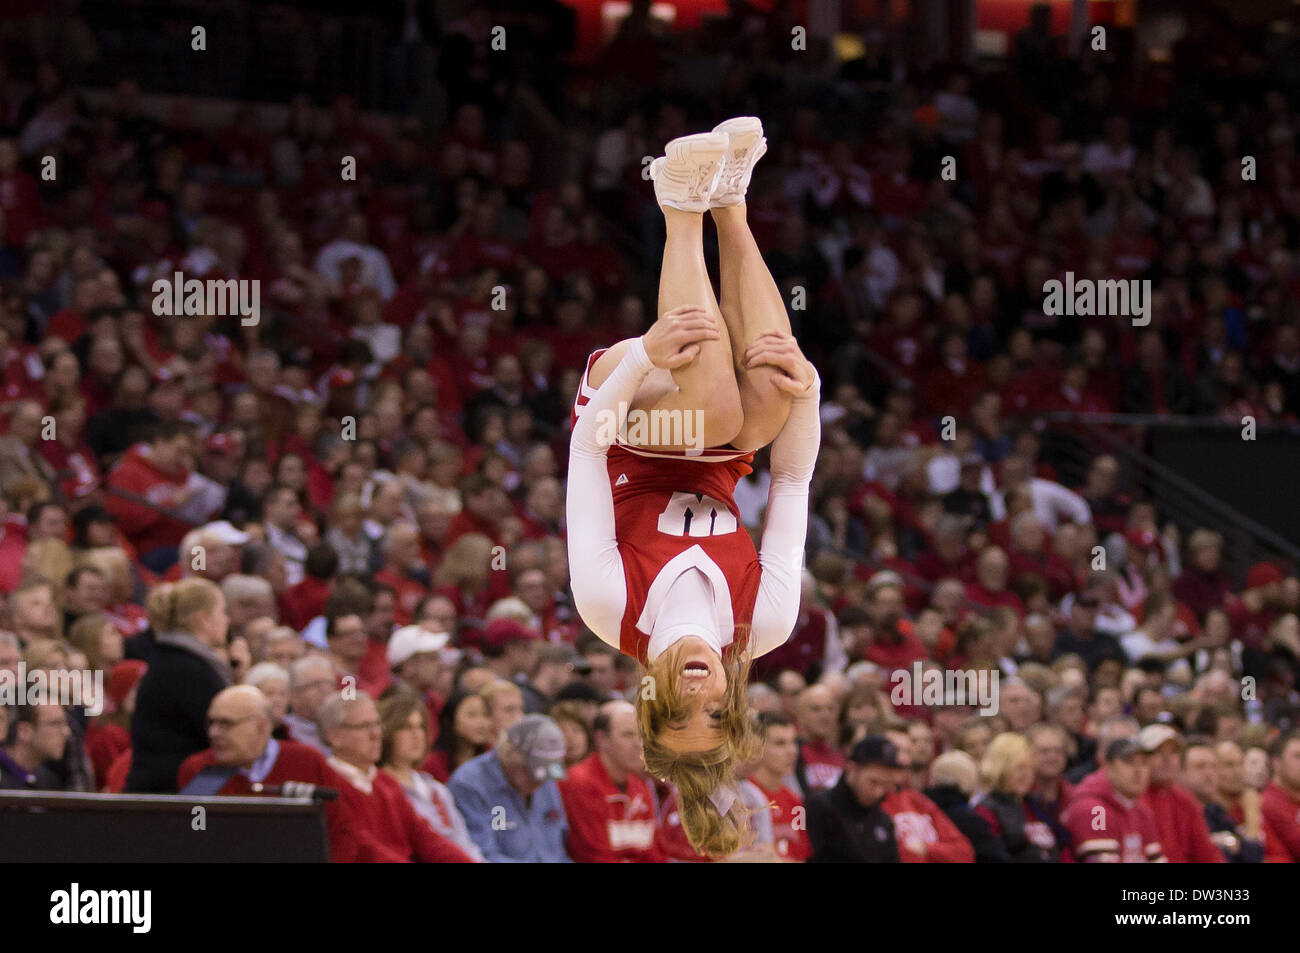 Madison, Wisconsin, USA. 25th Feb, 2014. February 25, 2014: A Wisconsin cheerleader does a backflip during the NCAA Basketball game between the Indiana Hoosiers and the Wisconsin Badgers at the Kohl Center in Madison, WI. Wisconsin defeated Indiana 69-58. John Fisher/CSM/Alamy Live News Stock Photo